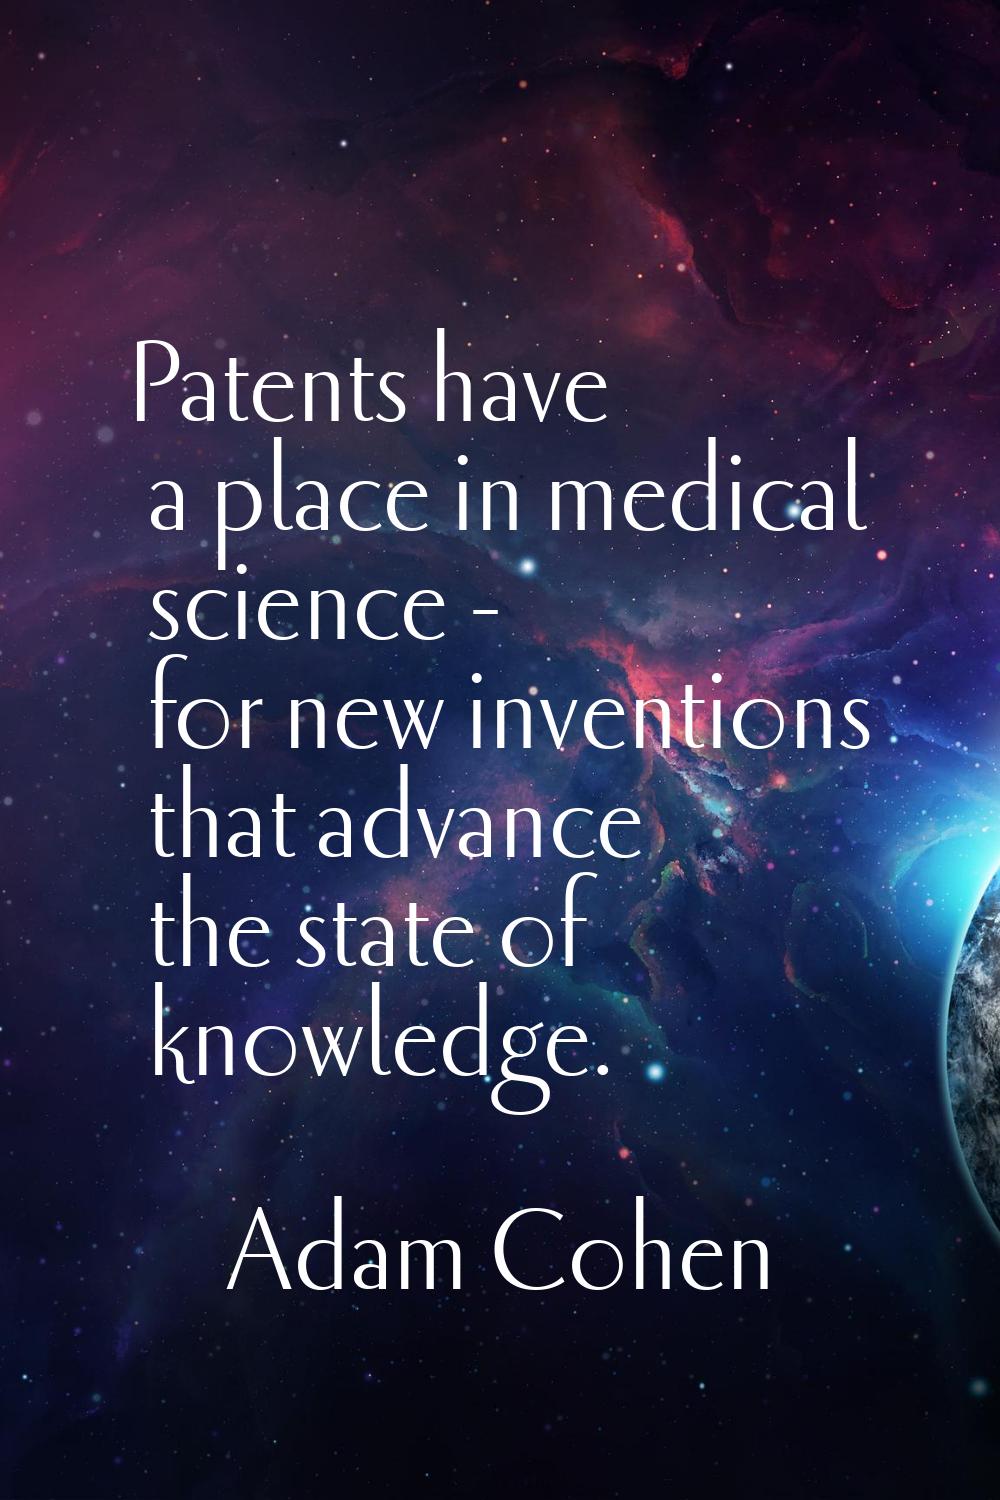 Patents have a place in medical science - for new inventions that advance the state of knowledge.